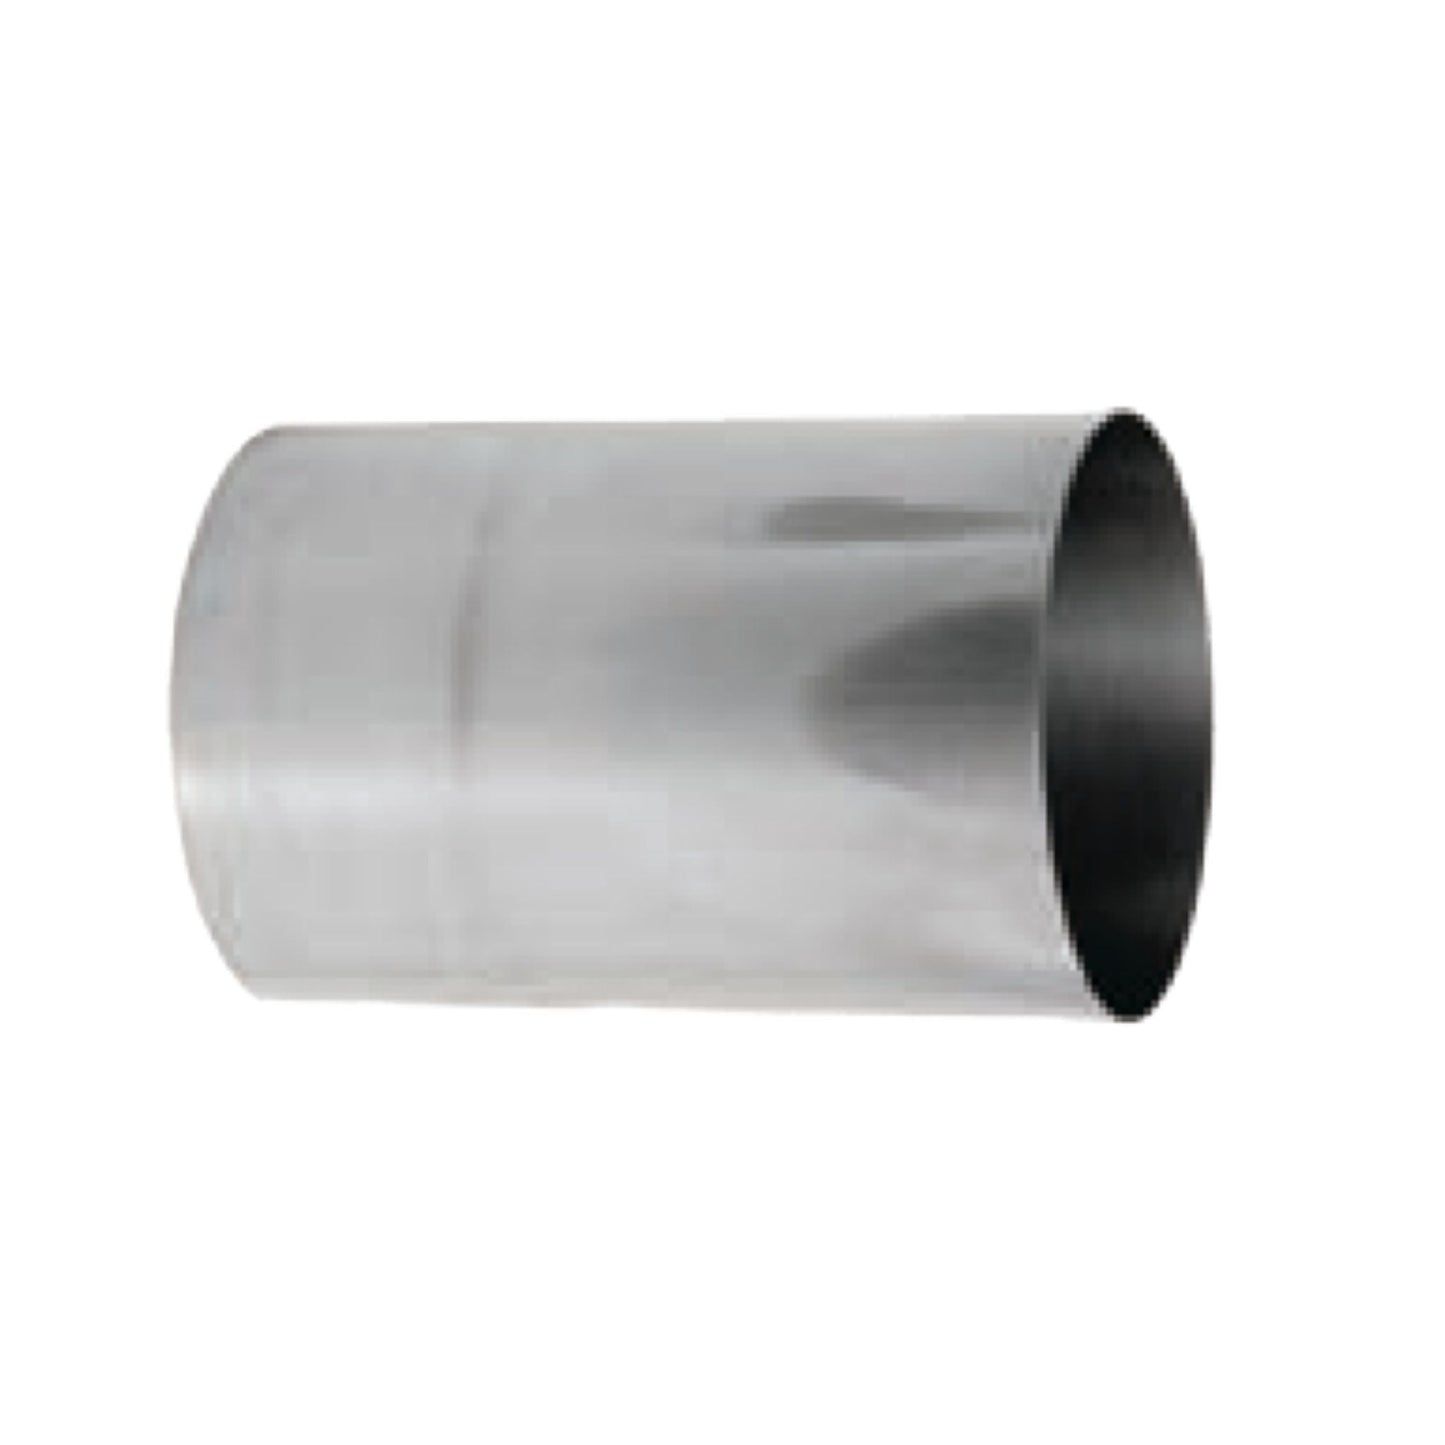 DuraVent FasNSeal 6" 29-4C Stainless Steel Wall Thimble Sleeve Extension